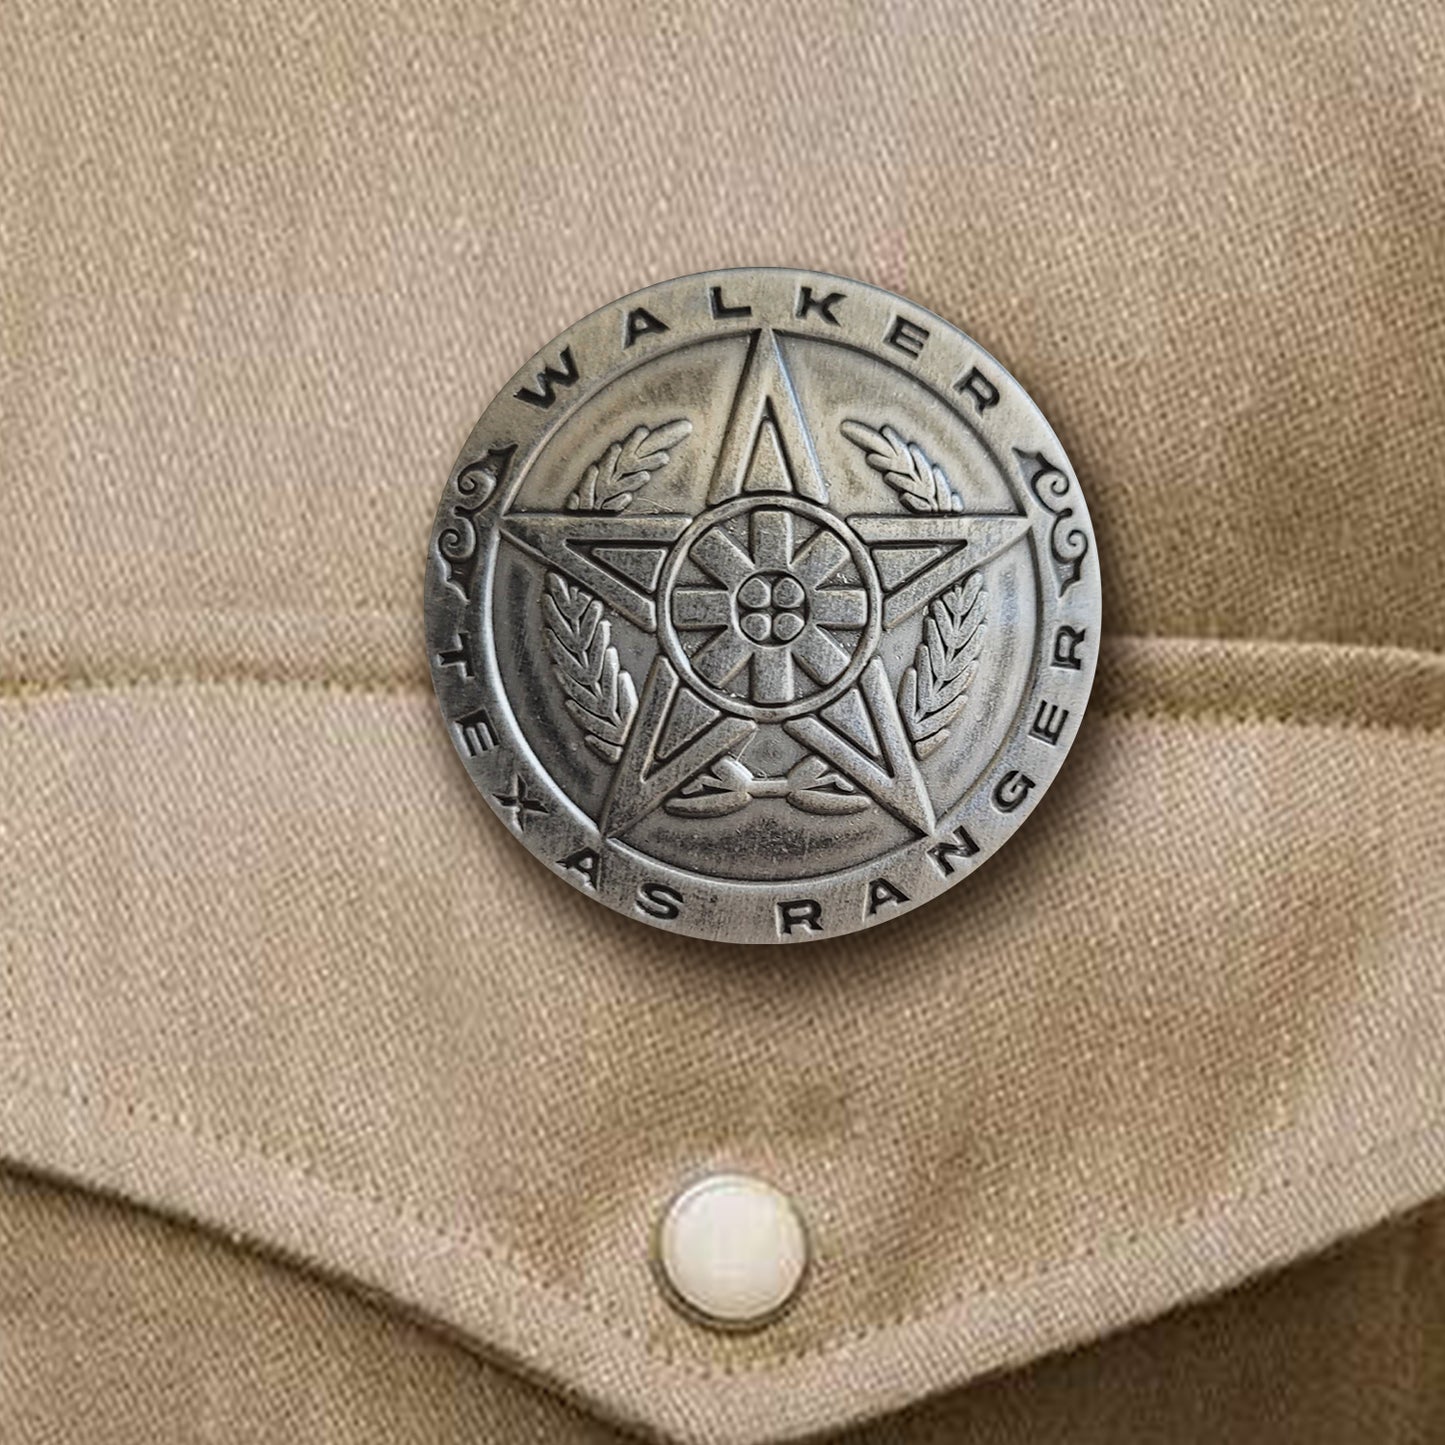 A brass pin in the shape of a sheriff's badge, attached to a tan shirt pocket. Around the edge is text saying "Walker: Texas Ranger."